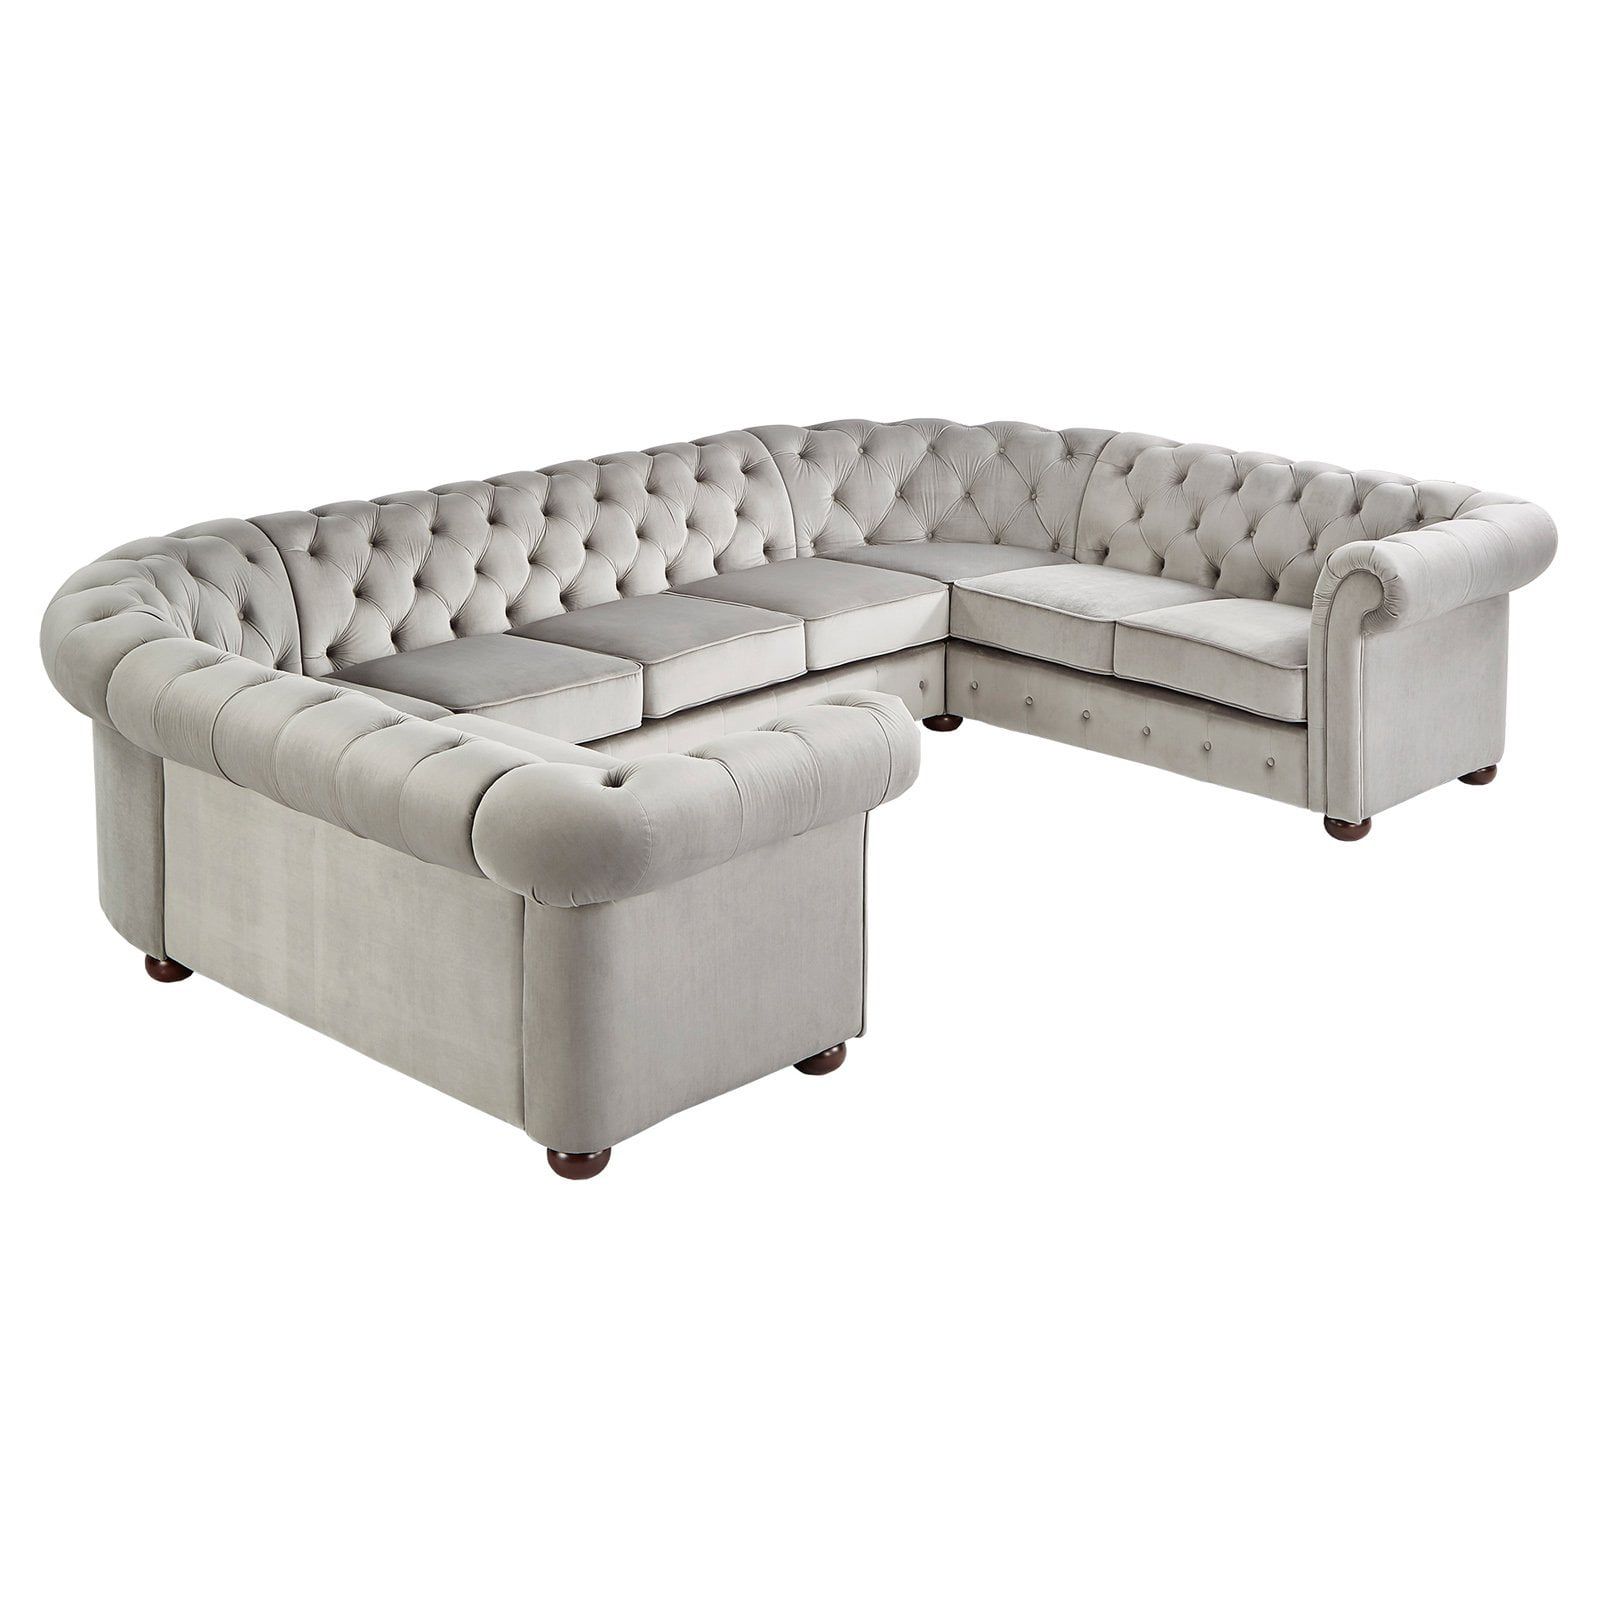 Weston Home Vance U Shape 9 Seat Velvet Sectional Sofa – Walmart Pertaining To U Shaped Couches In Beige (View 11 of 20)